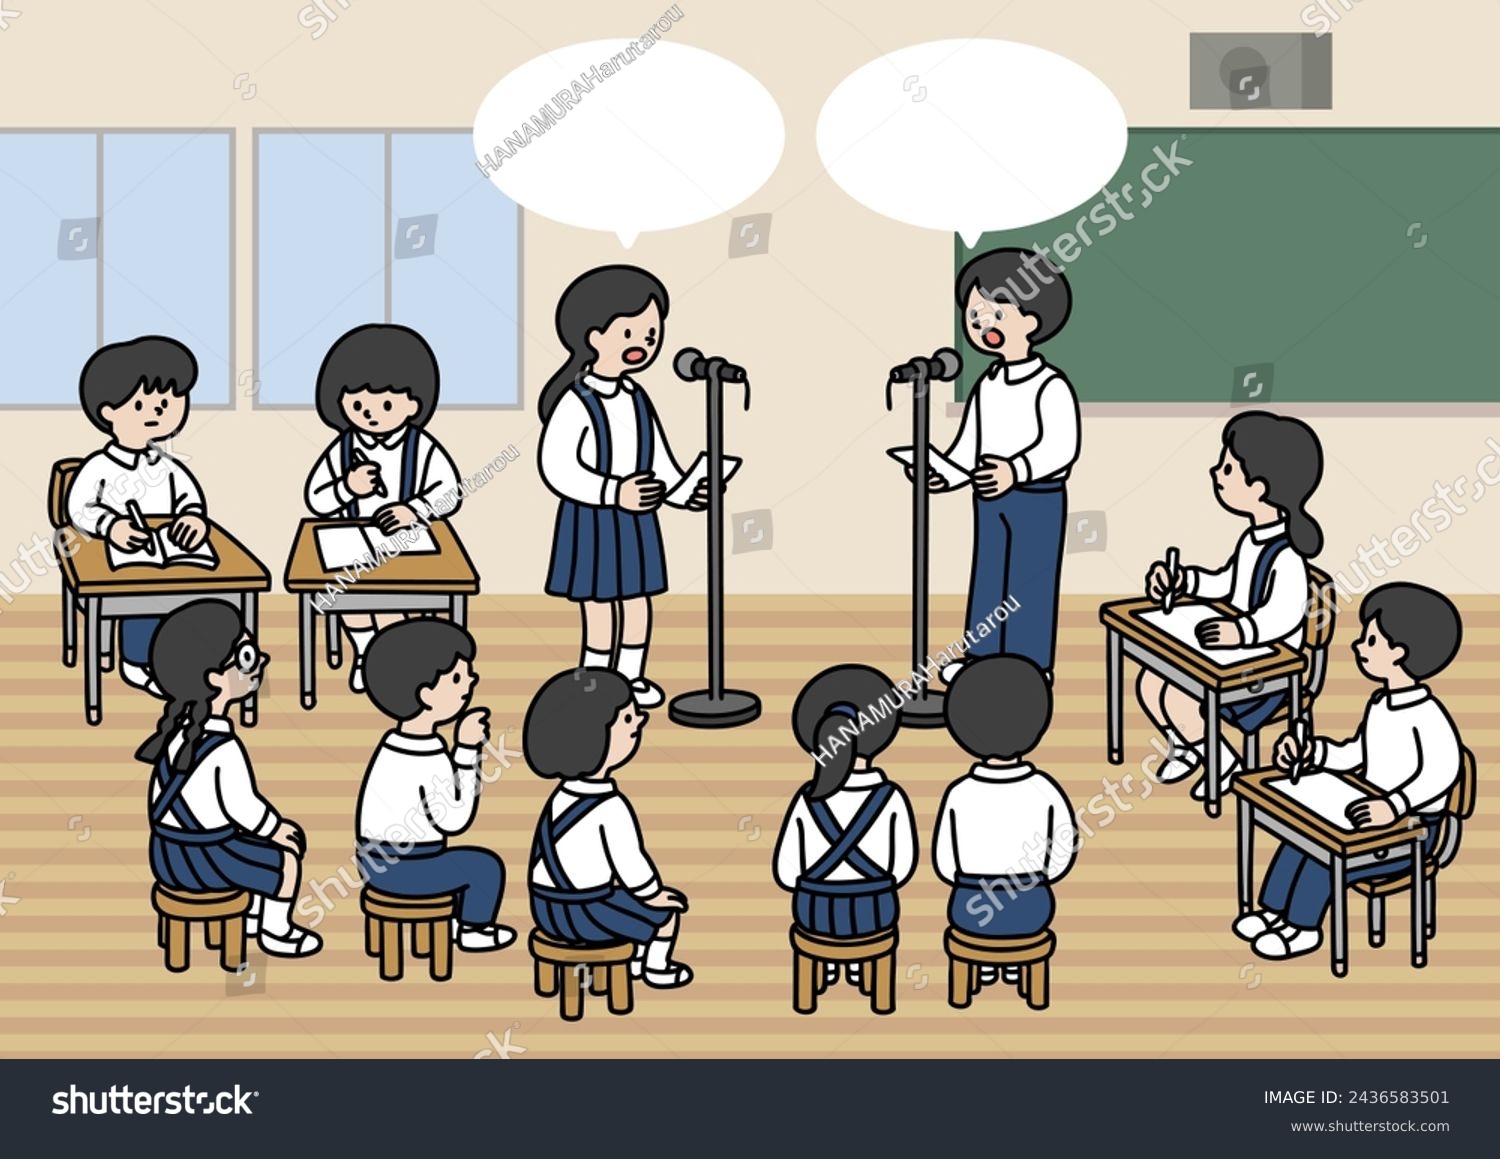 SVG of Vector illustration of students debating in the classroom svg